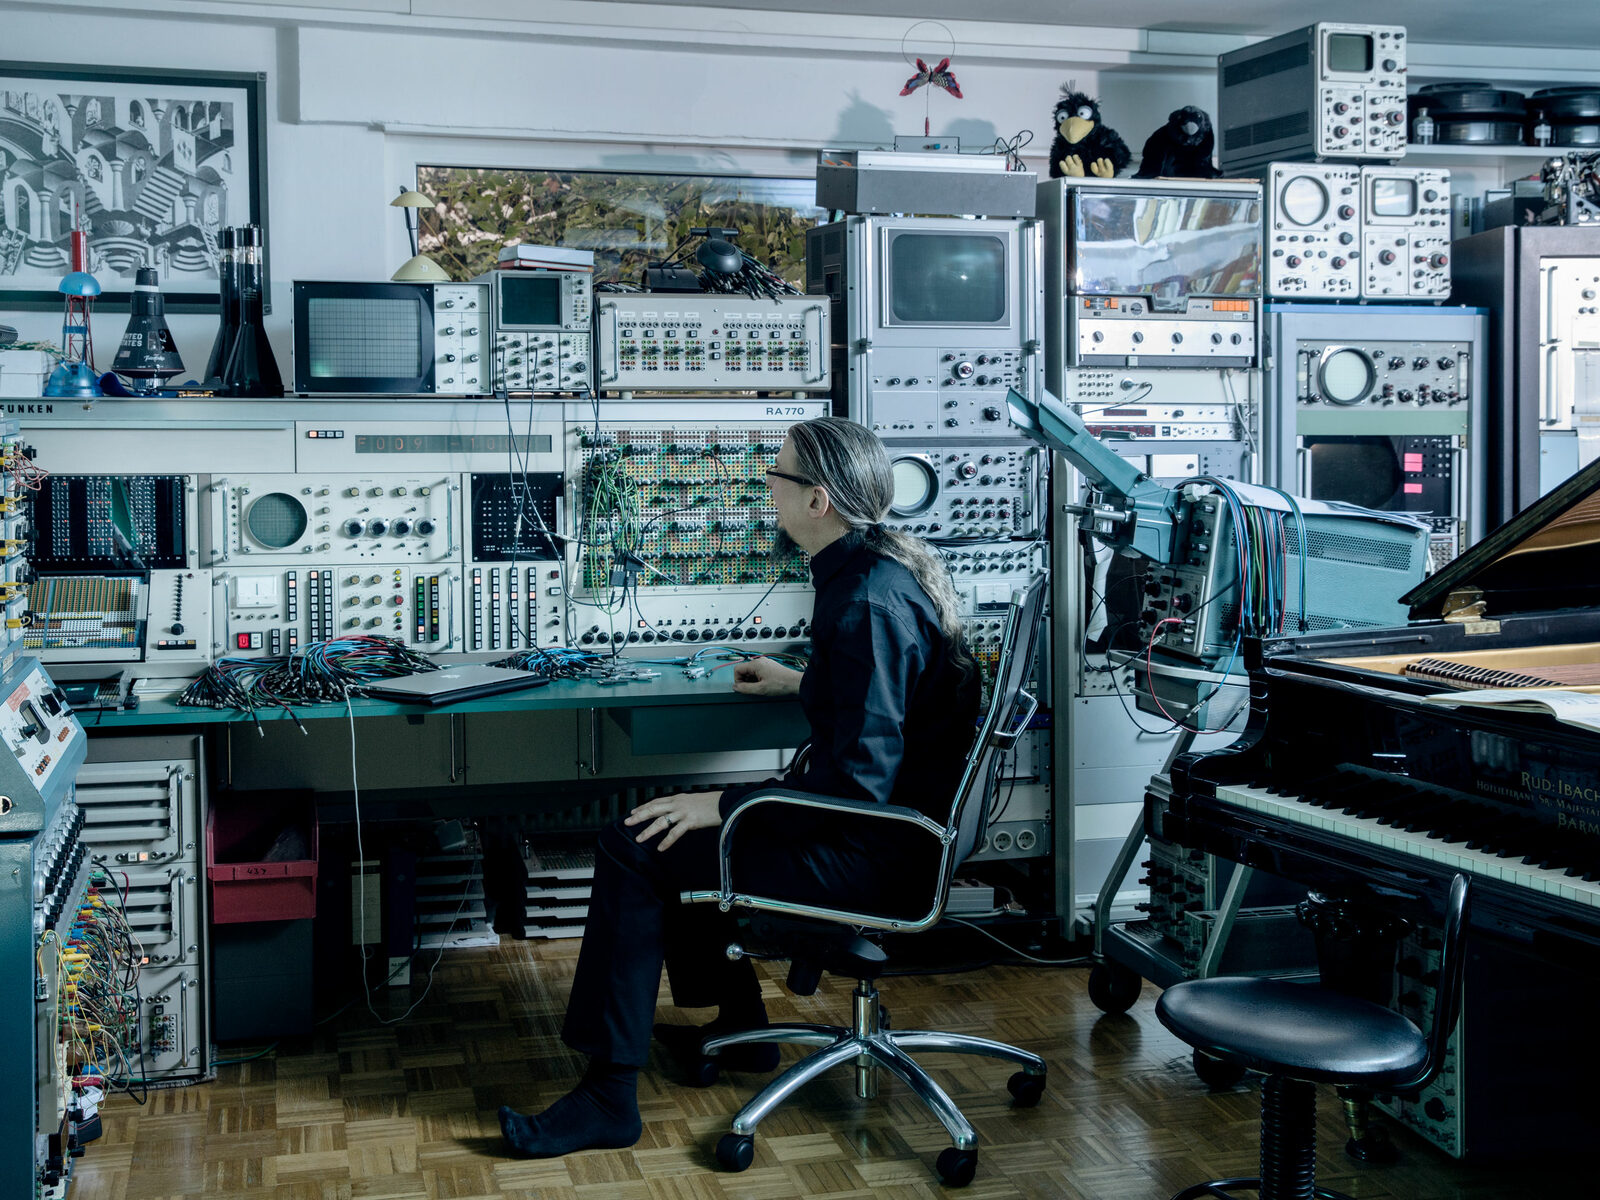 Bern Ulmann in front of his analog computers